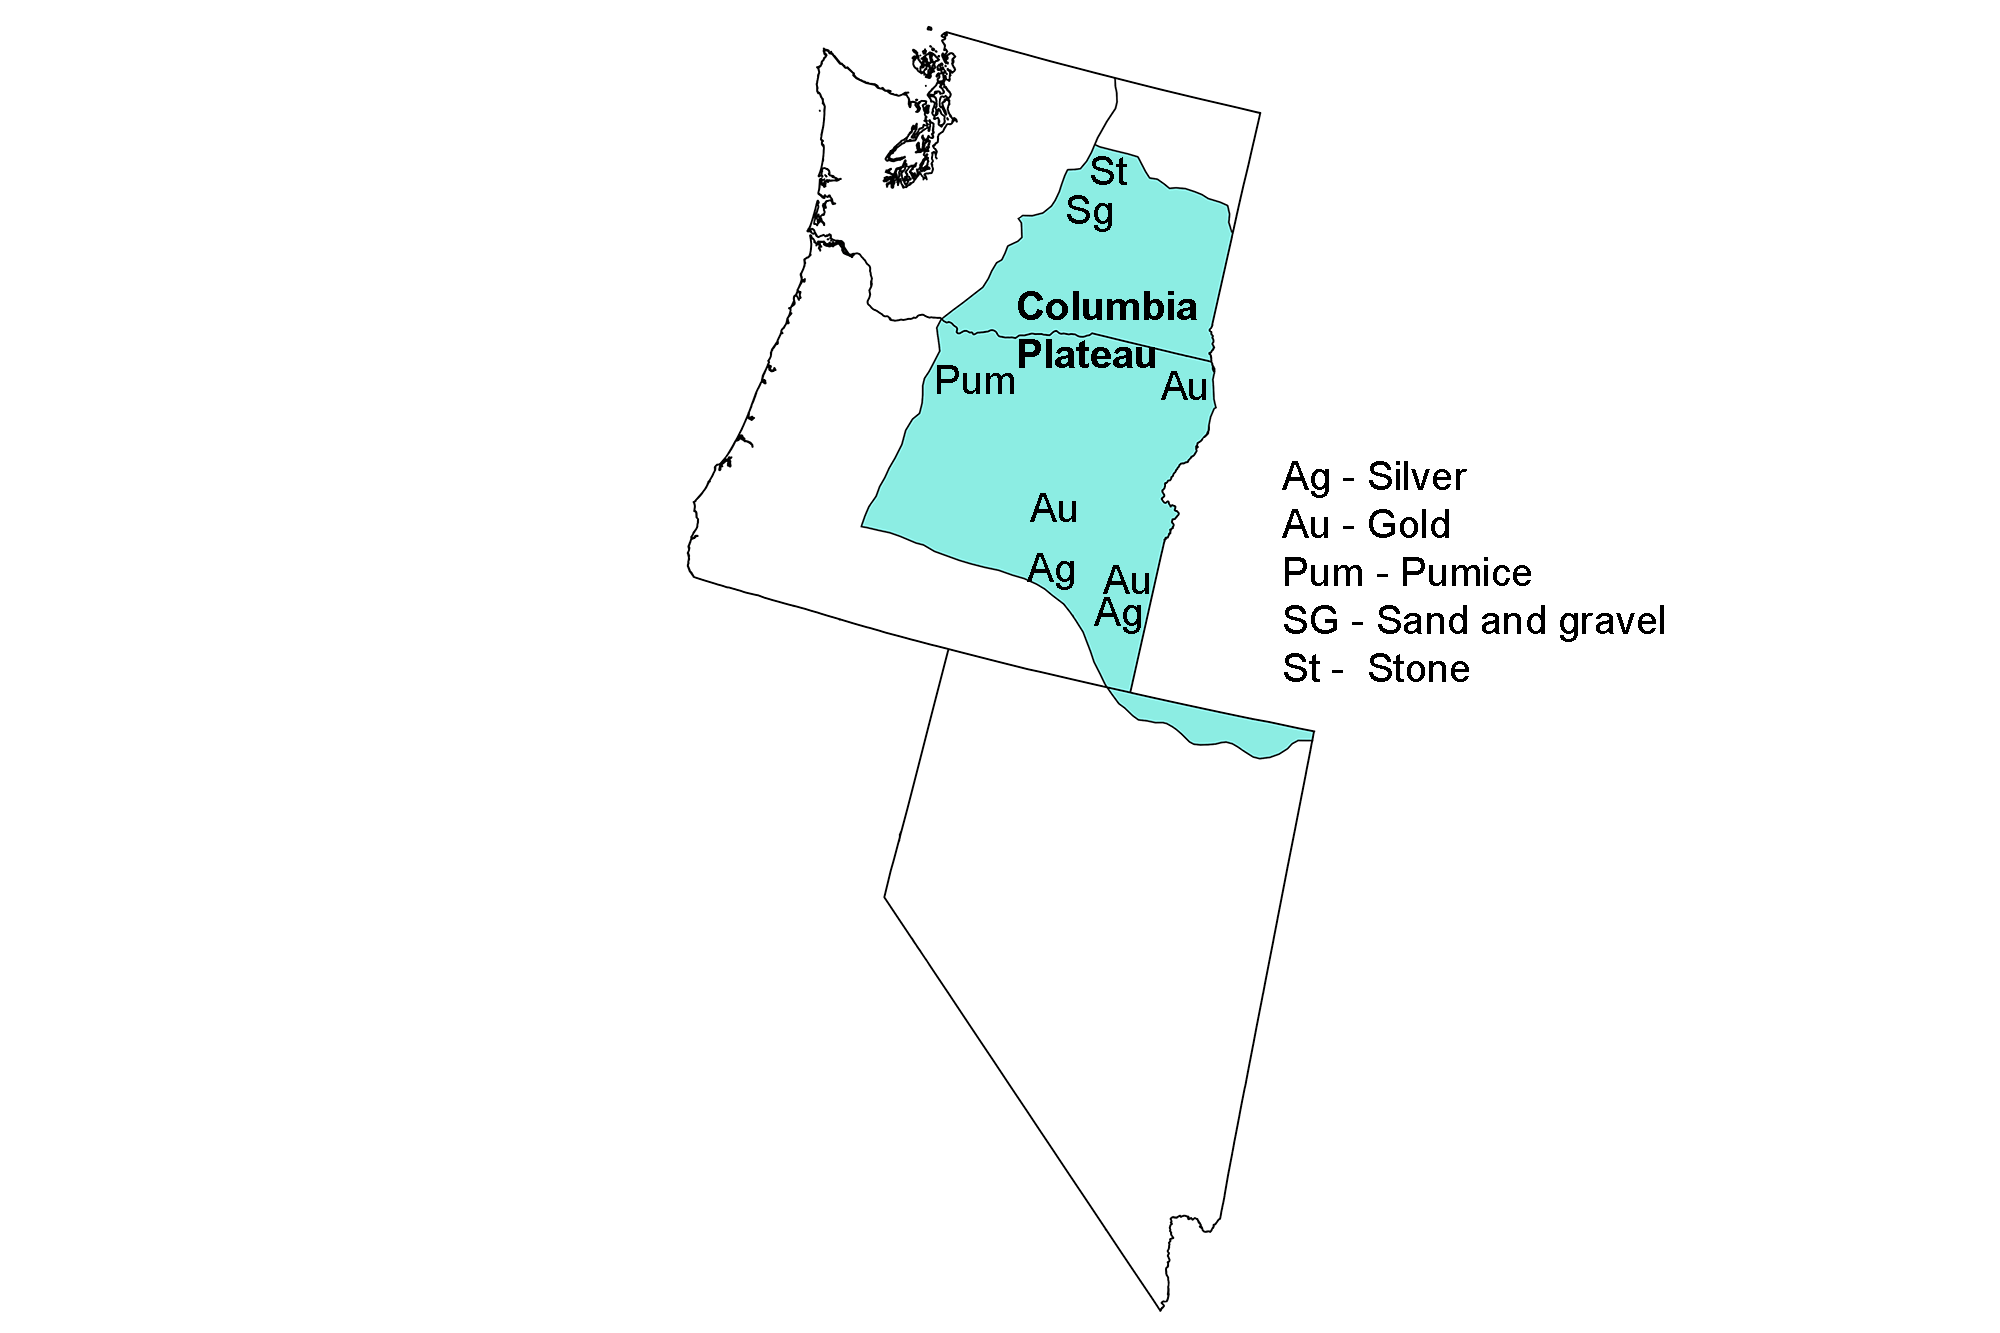 Map showing the locations of major mineral deposits in the Columbia Plateau region of the western United States.